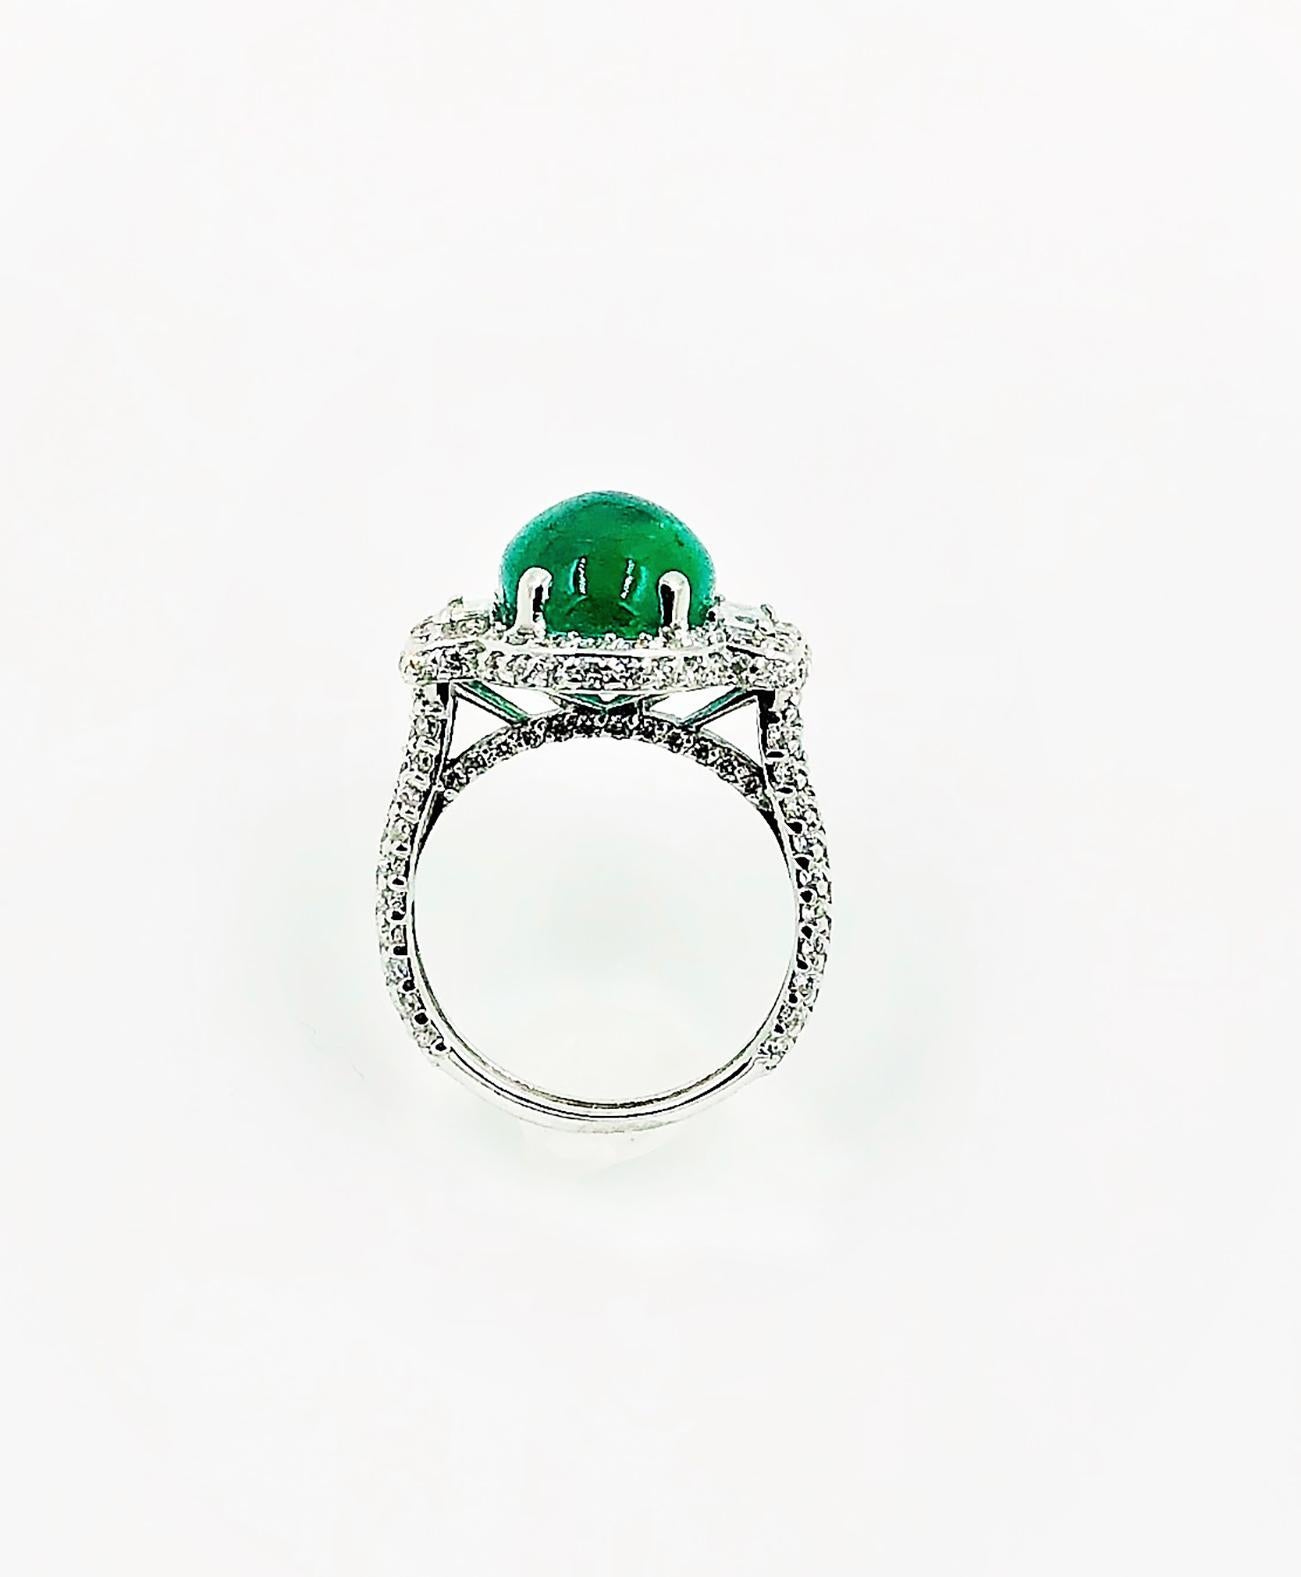 Women's or Men's Cabochon Colombian Emerald Diamond Cluster Ring Weighing 7.35 Carat 